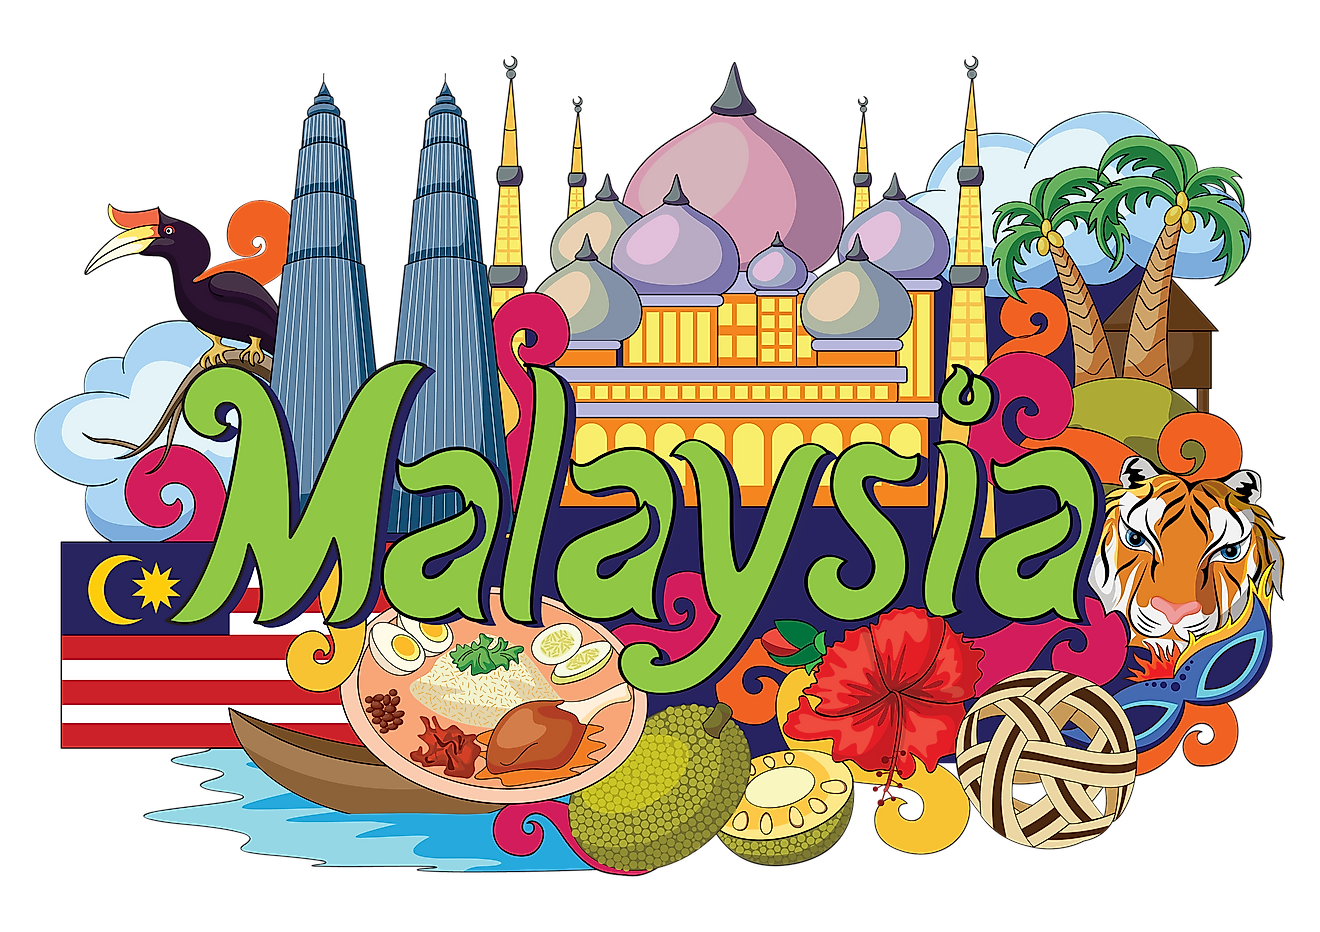 malaysian culture poster